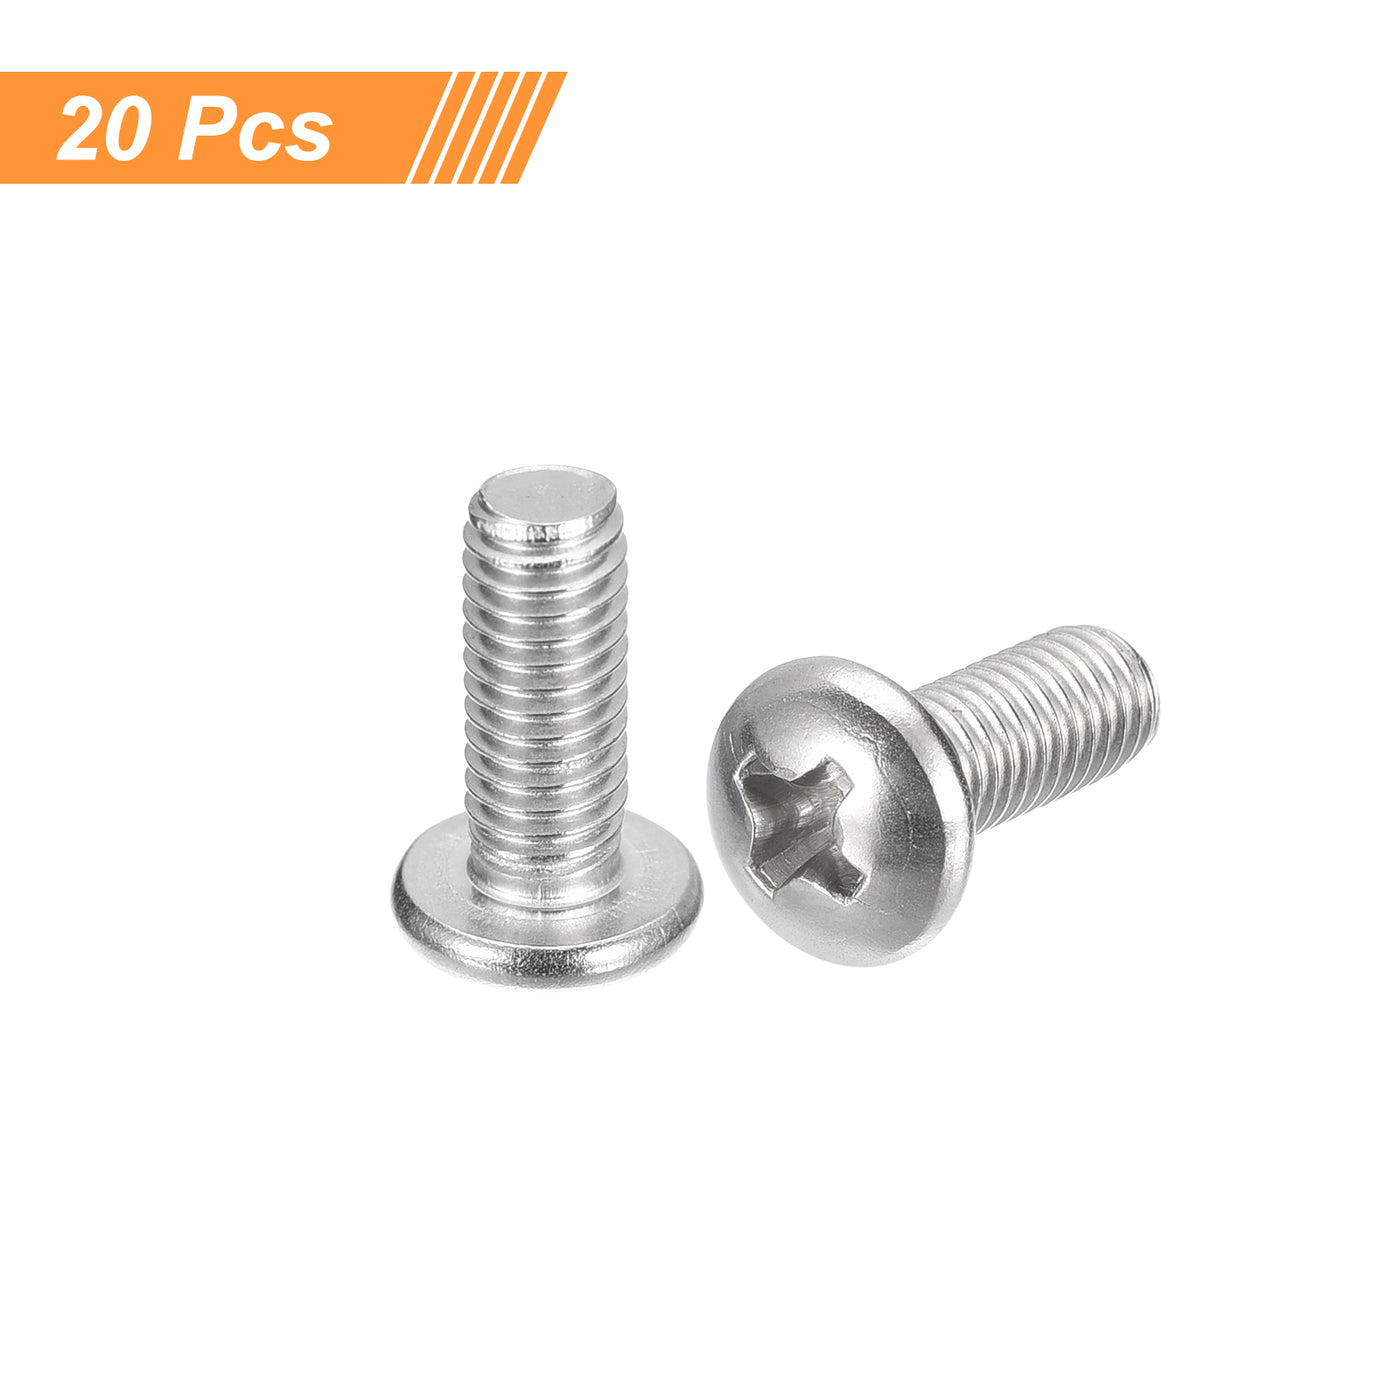 uxcell Uxcell #10-32x1/2" Pan Head Machine Screws, Stainless Steel 18-8 Screw, Pack of 20